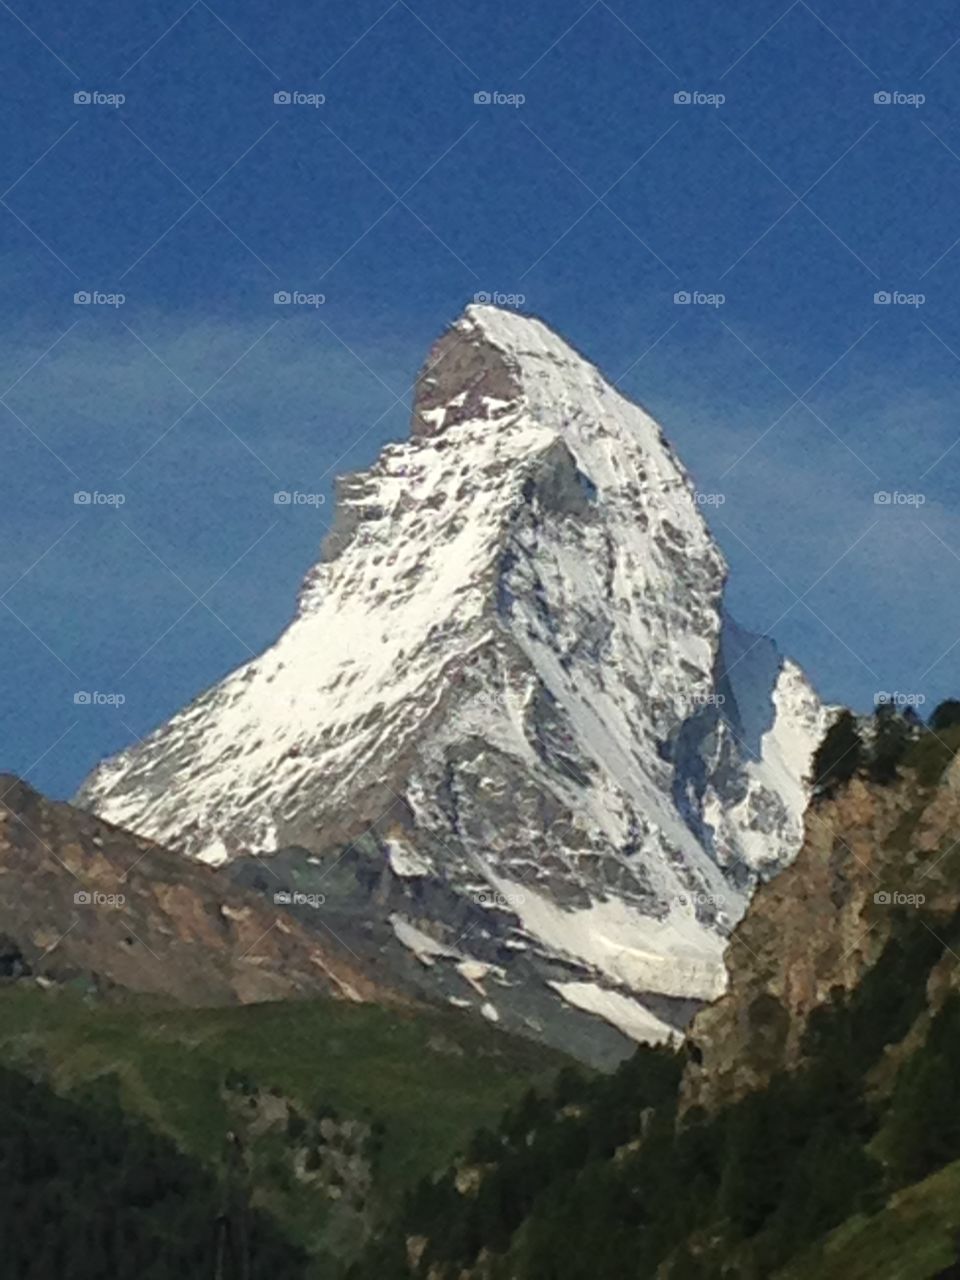 The one and only Matterhorn. When you are around it, you can’t stop looking at it!